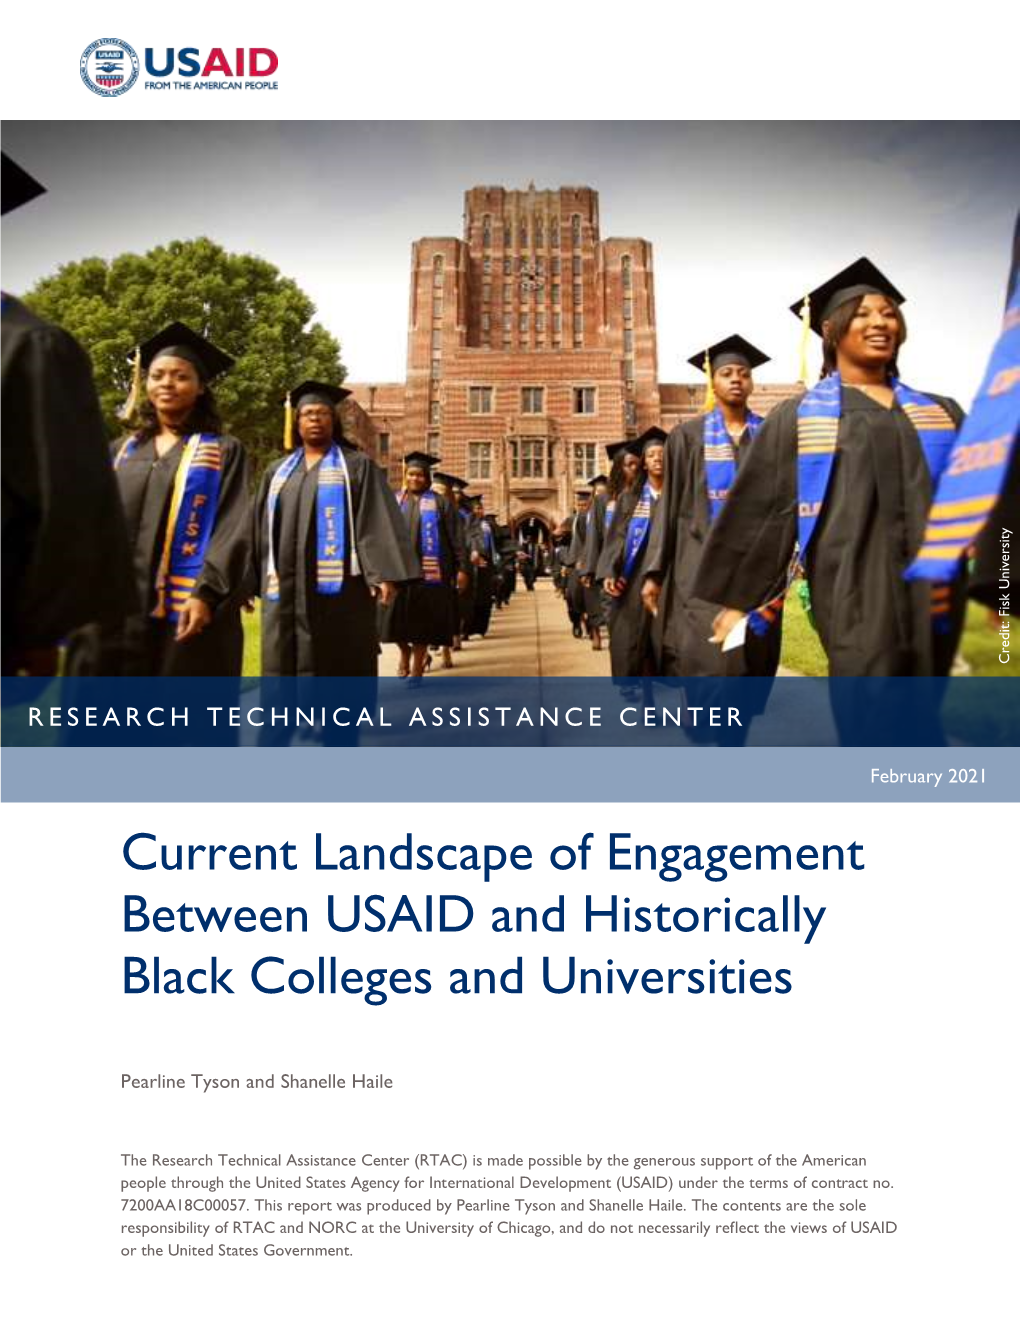 Current Landscape of Engagement Between USAID and Historically Black Colleges and Universities